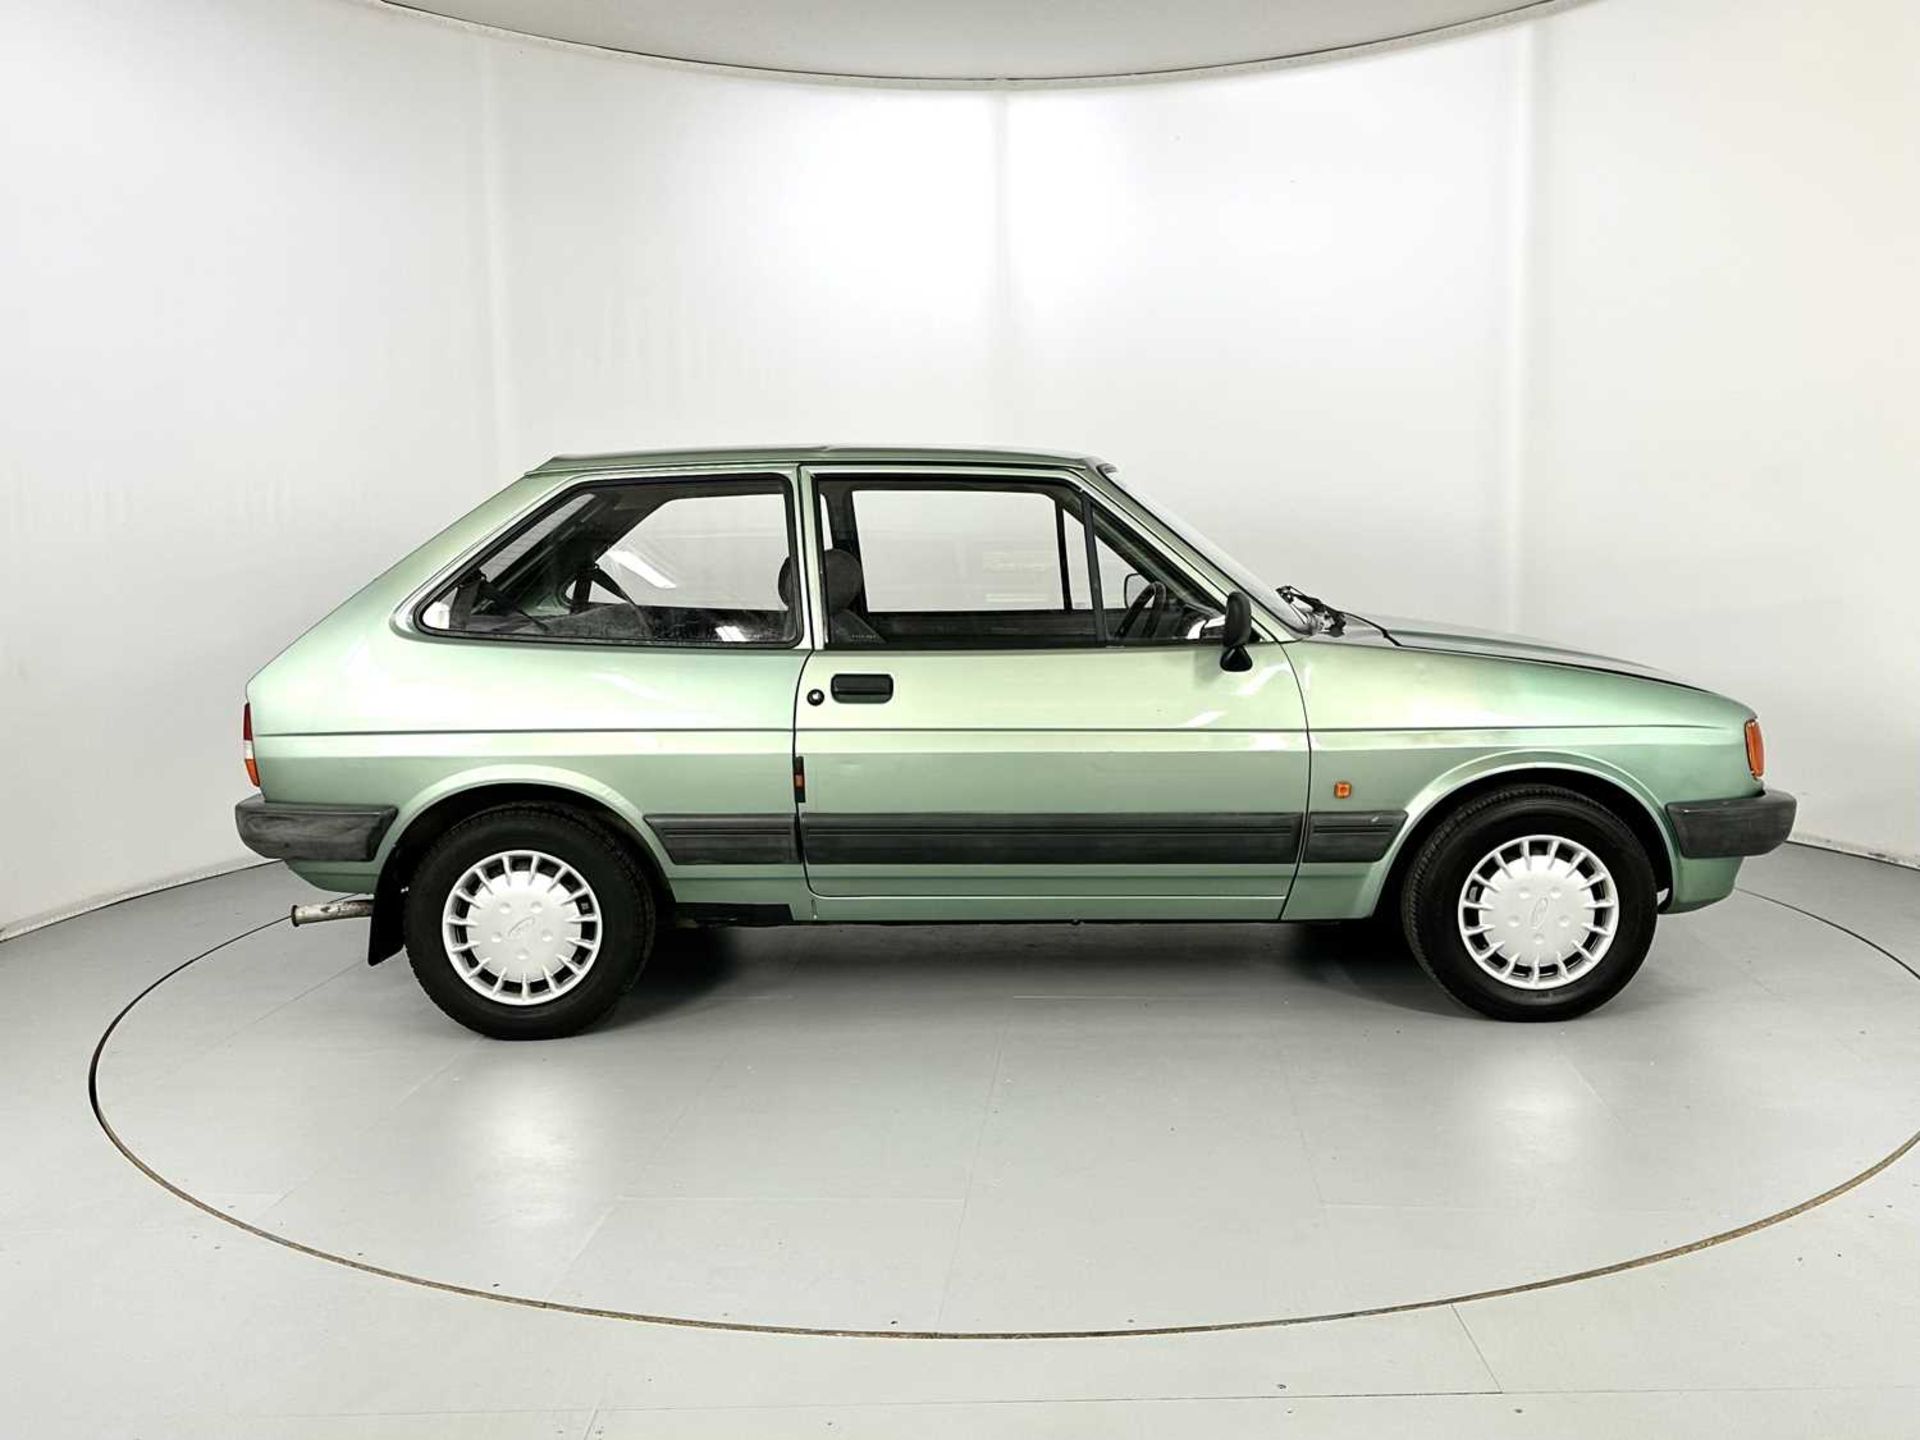 1988 Ford Fiesta - Image 11 of 30